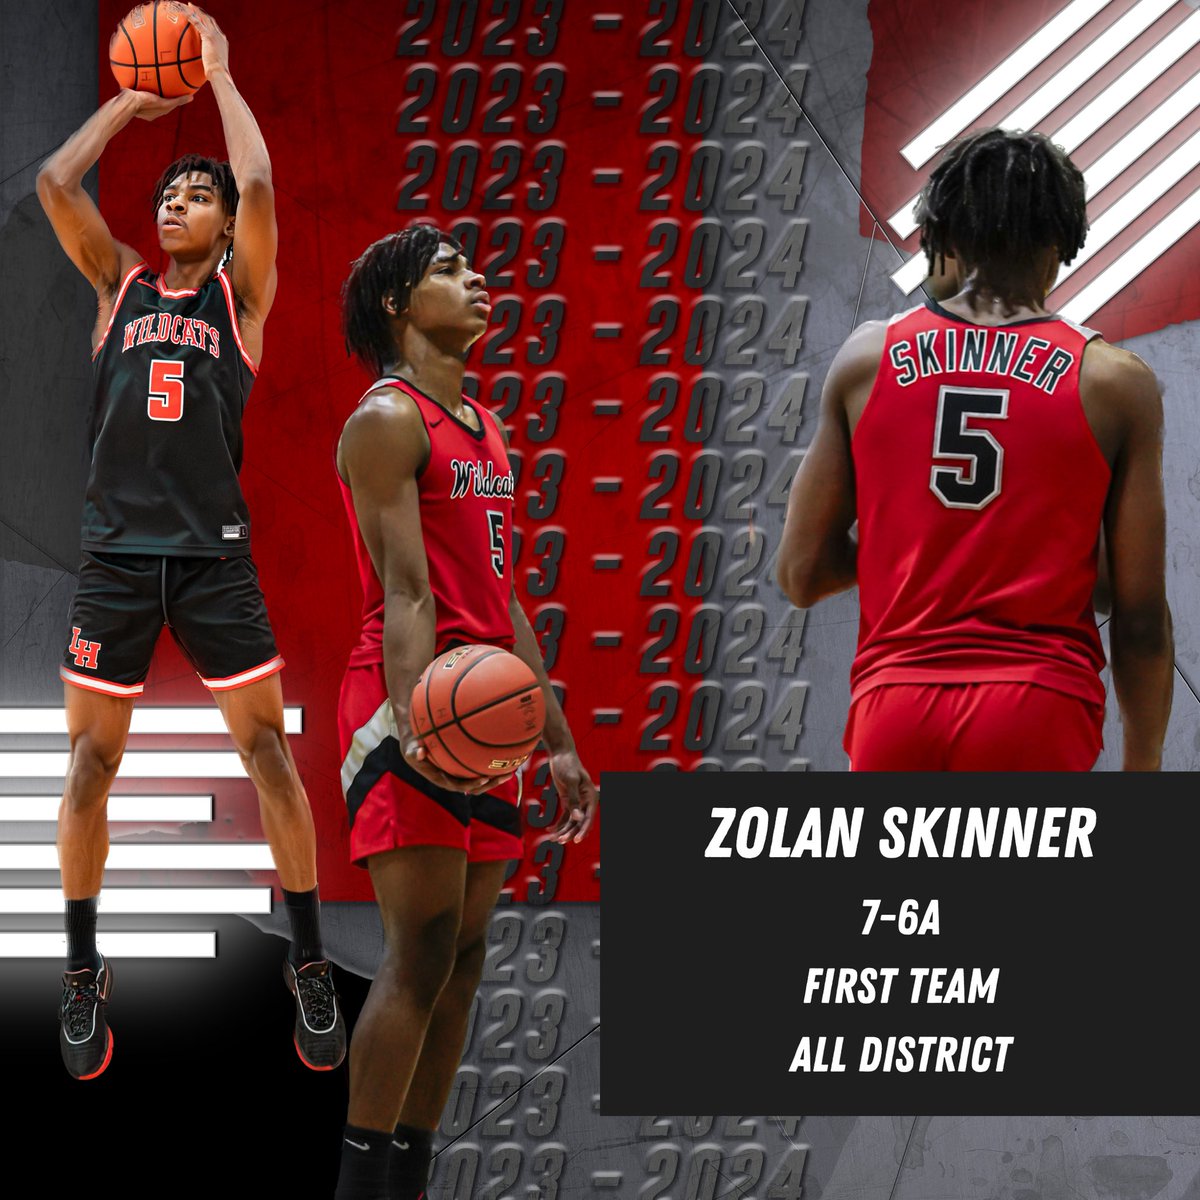 Congrats to @Zolanskinner11 for being named 1st Team All District! 🏀🐾 #Family